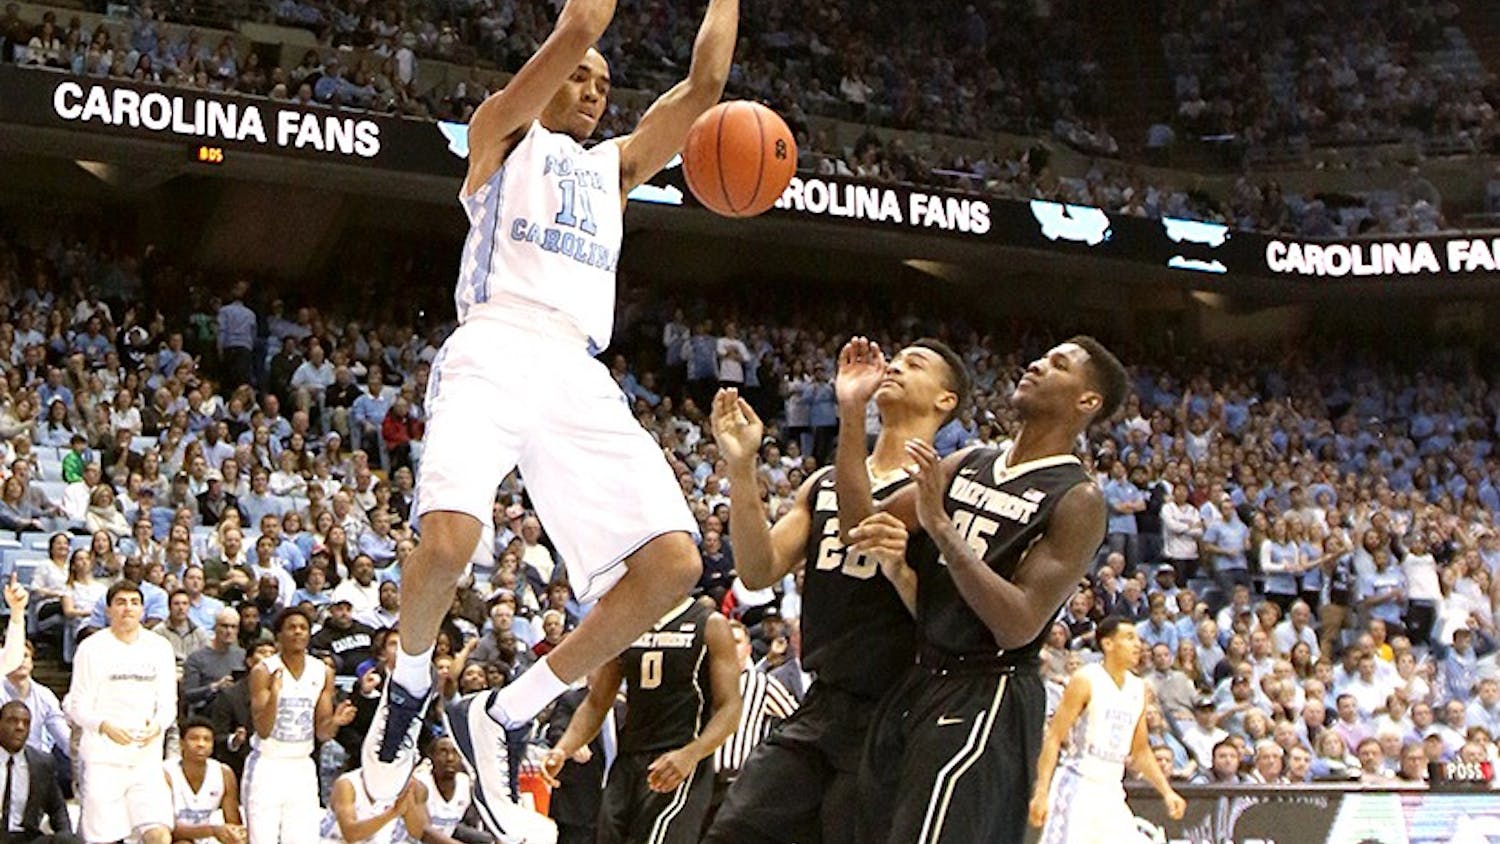 Brice Johnson (11) dunks the ball during North Carolina’s home game against Wake Forest.